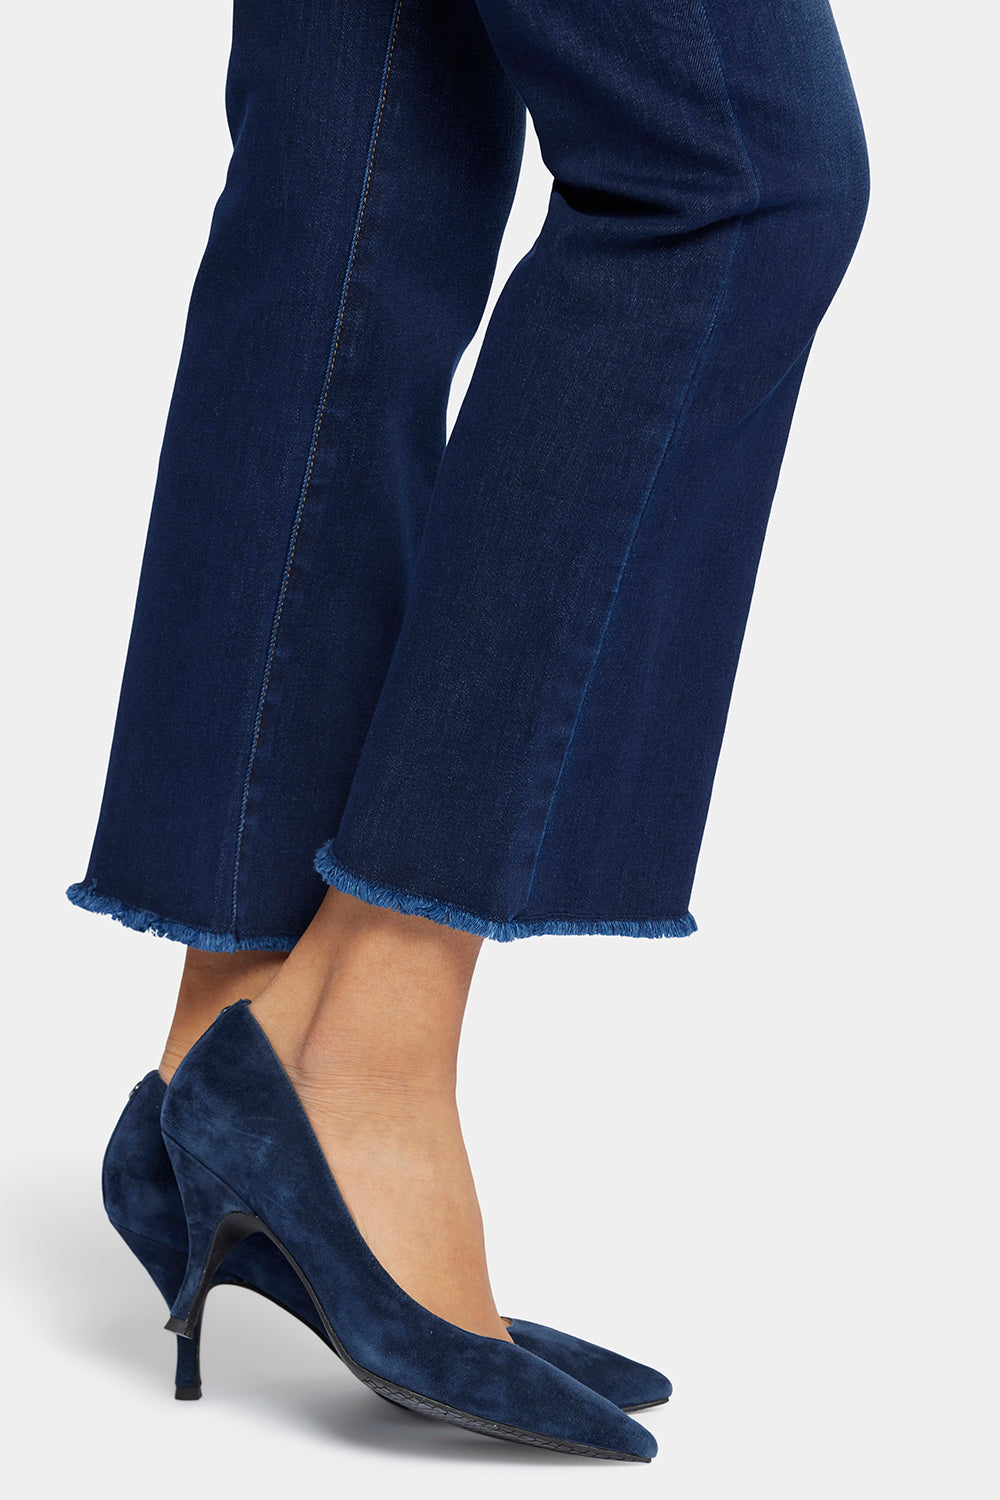 NYDJ Barbara Bootcut Ankle Jeans With Frayed Hems - Northbridge